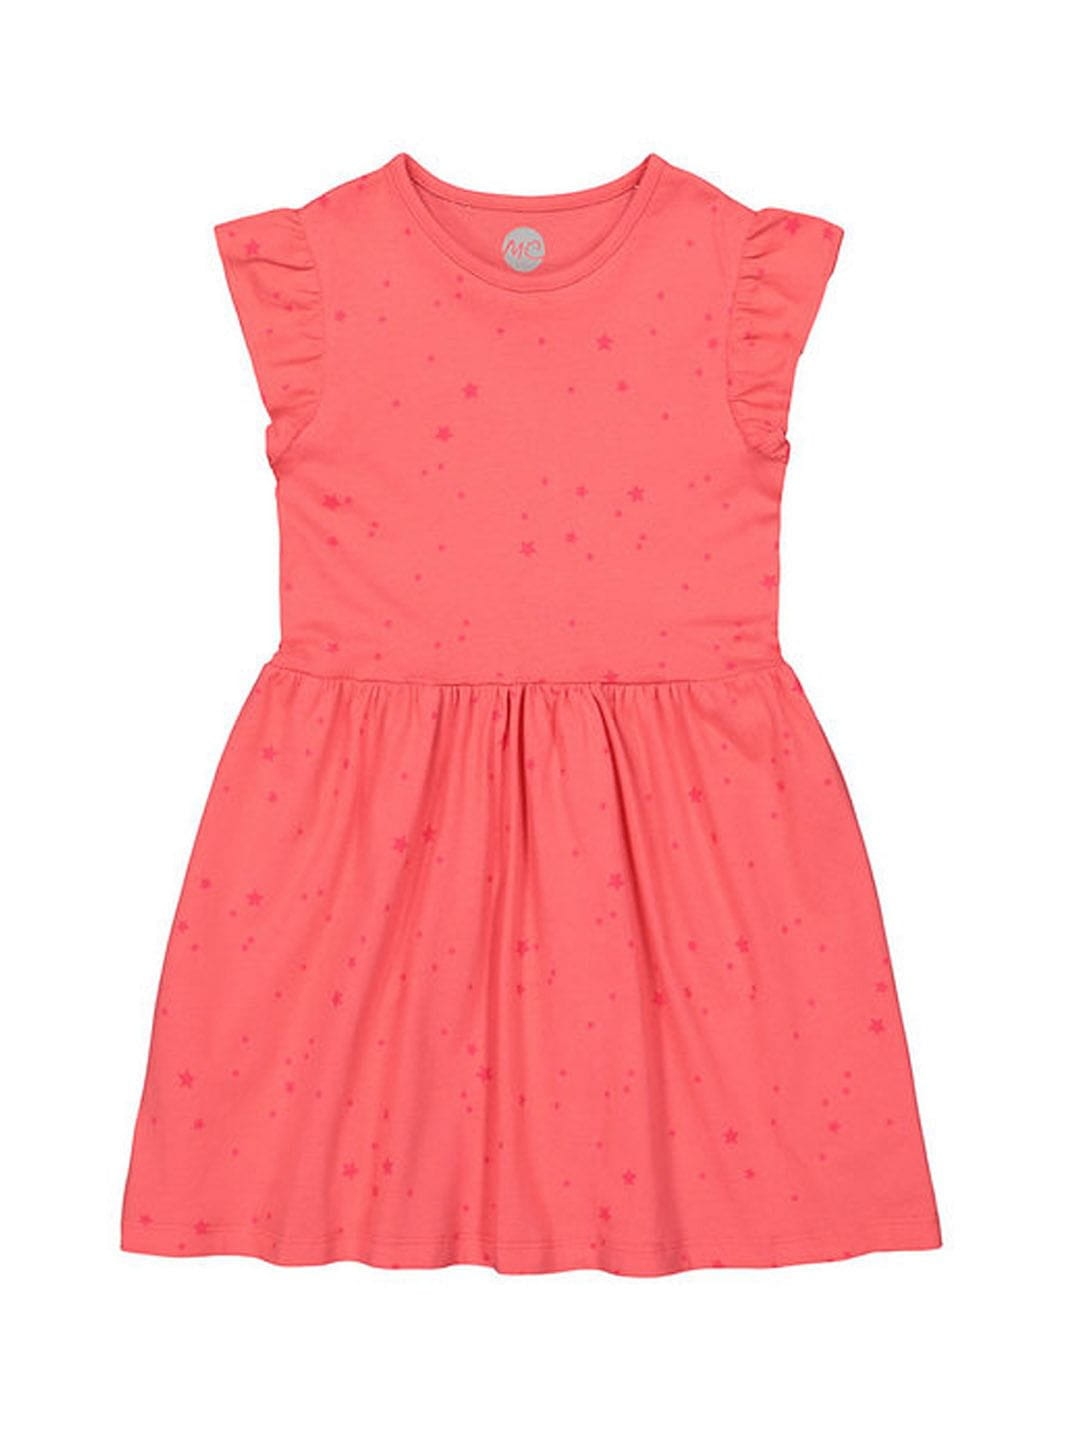 Mothercare | Girls Half Sleeve Casual Dress - Printed Pink 0